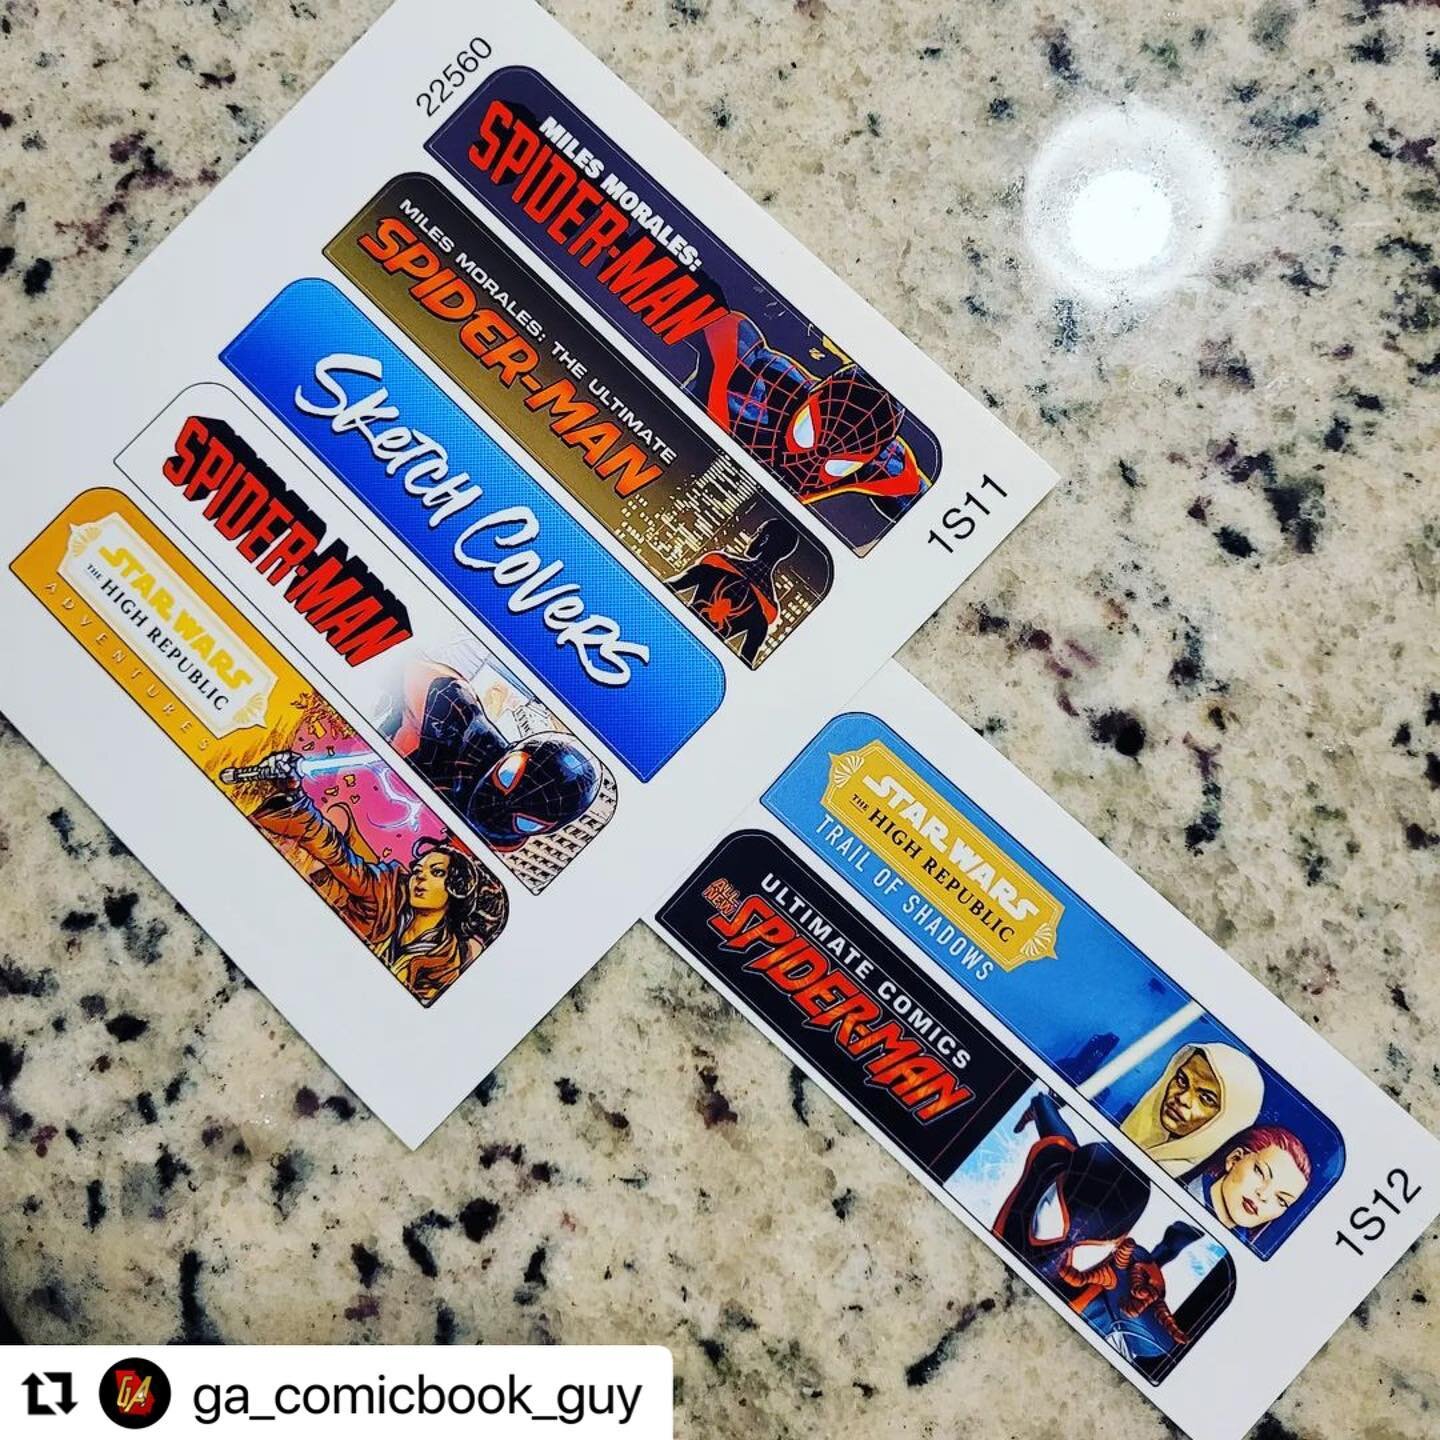 If you&rsquo;re into comics, Star Wars, Funkos, and more give @ga_comicbook_guy a follow.
.
.
.
.
.
#milesmorales #milesmoralesspiderman #milesmoralesultimatespiderman #spiderman #starwars #starwarshighrepublic #highrepublic #highrepublicadventures #